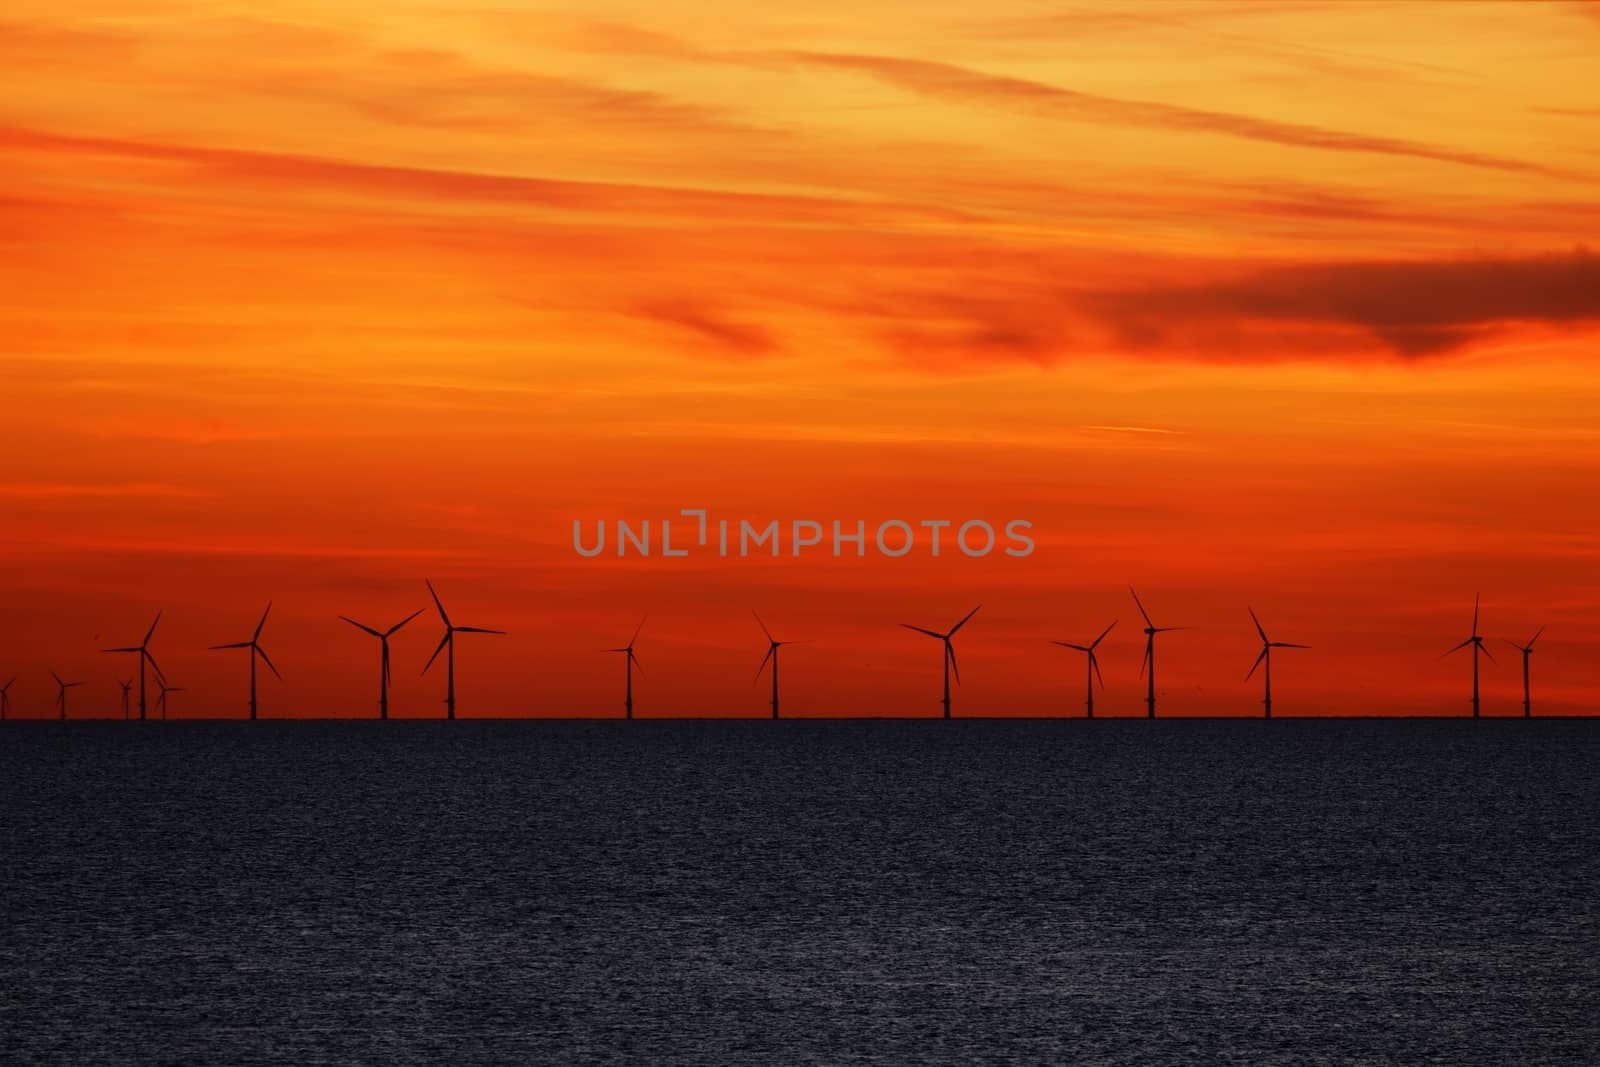 Windfarm on the sea at sunset by svedoliver